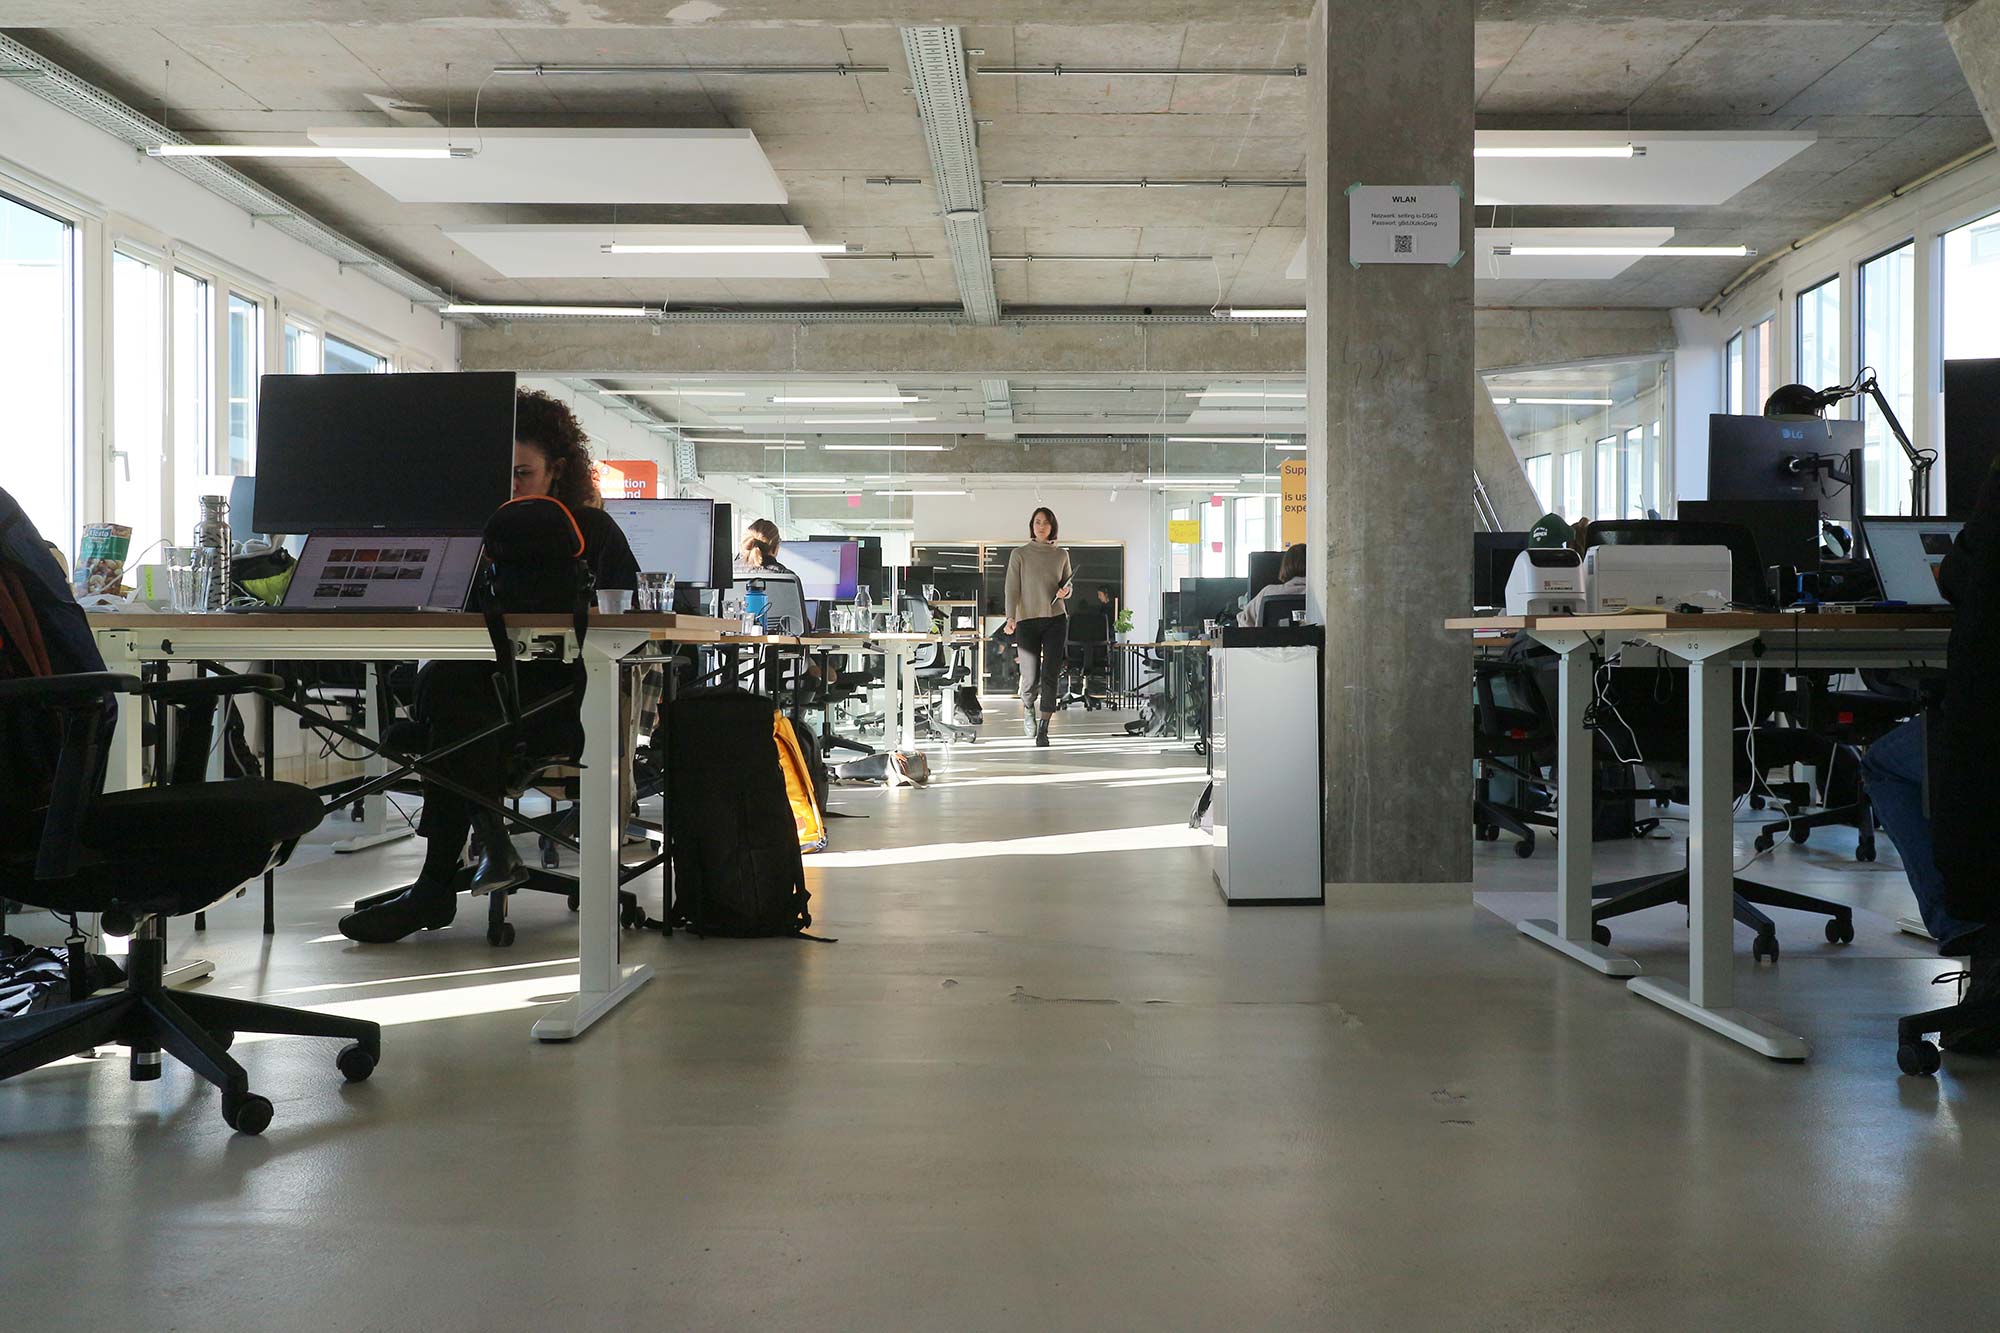 A large open office space with a hallway in the middle; large work desks with tables are on the right and left; there are screens, laptops, and other office supplies on the desks; a person walks from back to front in the hallway; the ceiling is exposed concrete, the floor is gray, and there are windows on the side walls